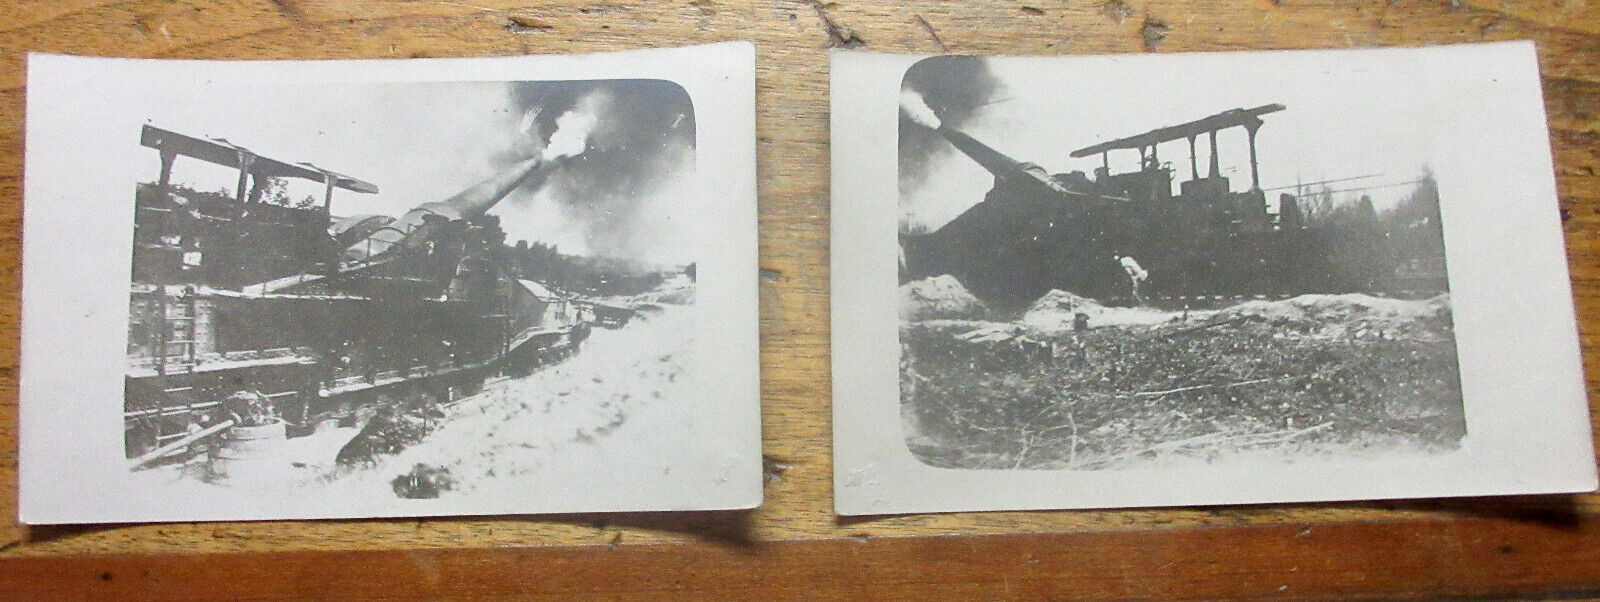 2~ ICONIC WWI RPPC WORLD WAR I POSTCARDS CANNONS FIRING (same one?)